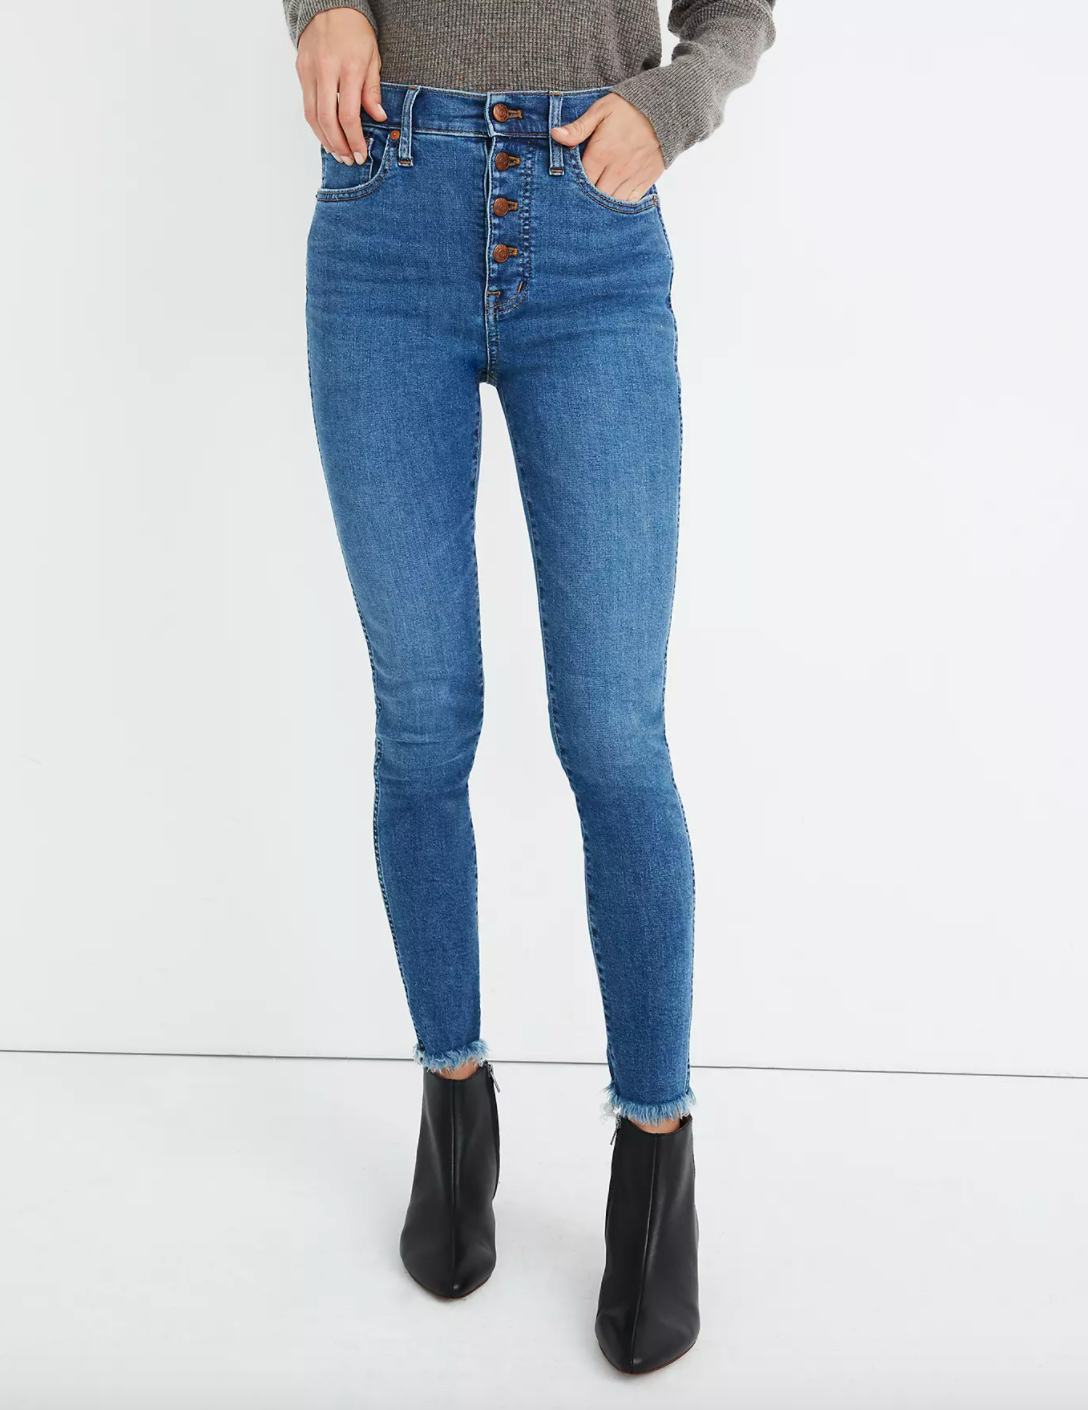 Madewell + High-Rise Skinny Jeans in Mackey Wash: Button-Front